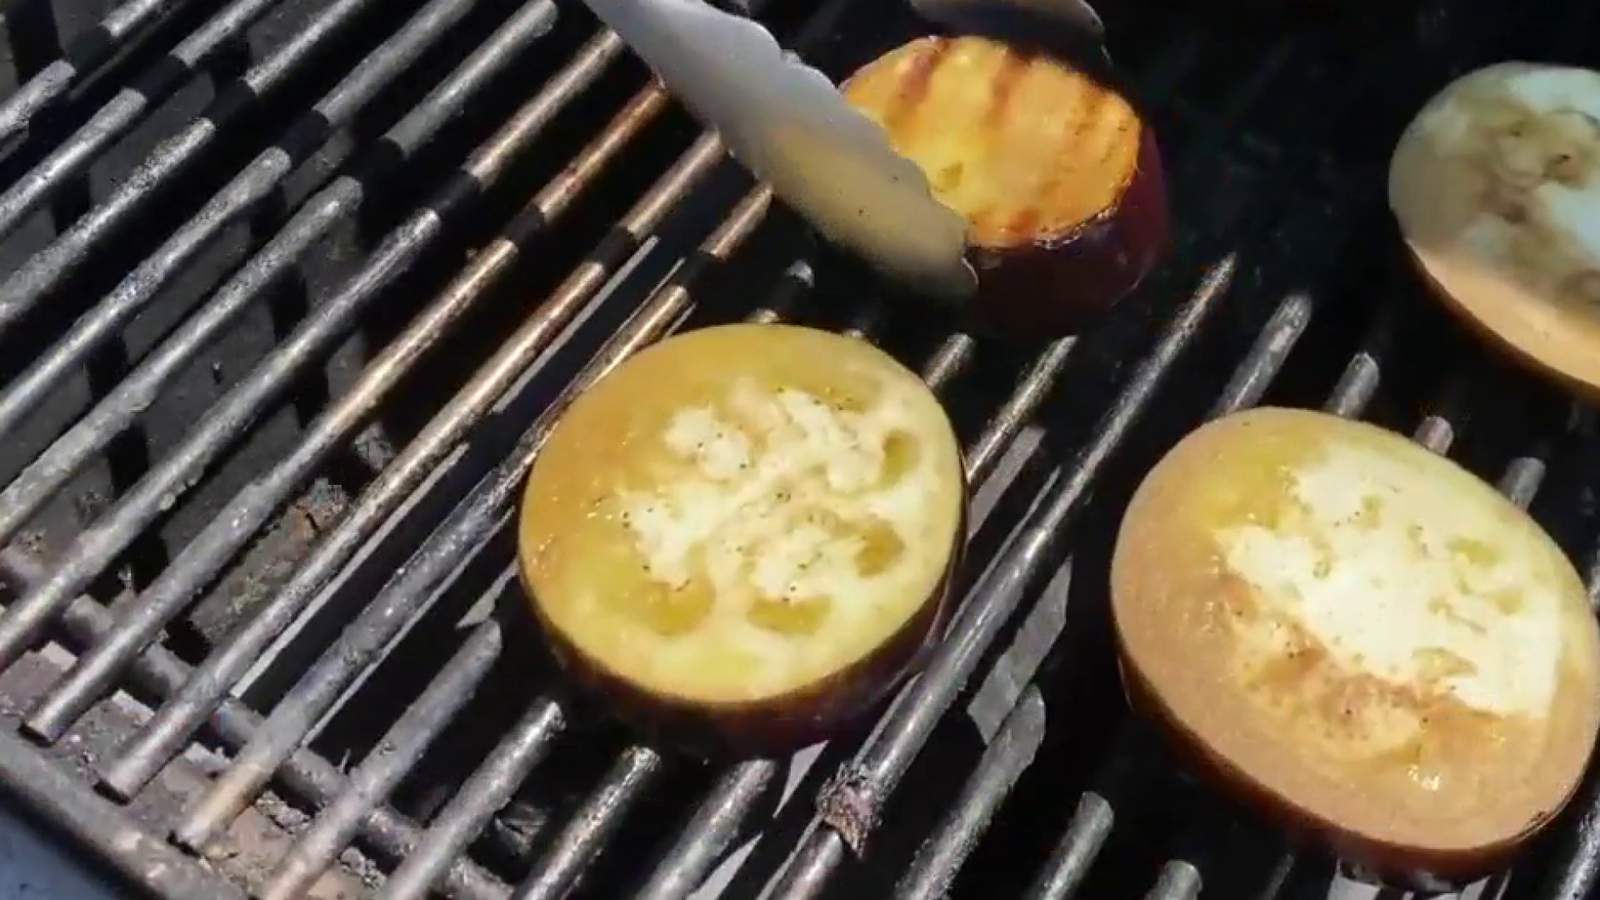 New foods to try on the grill this summer